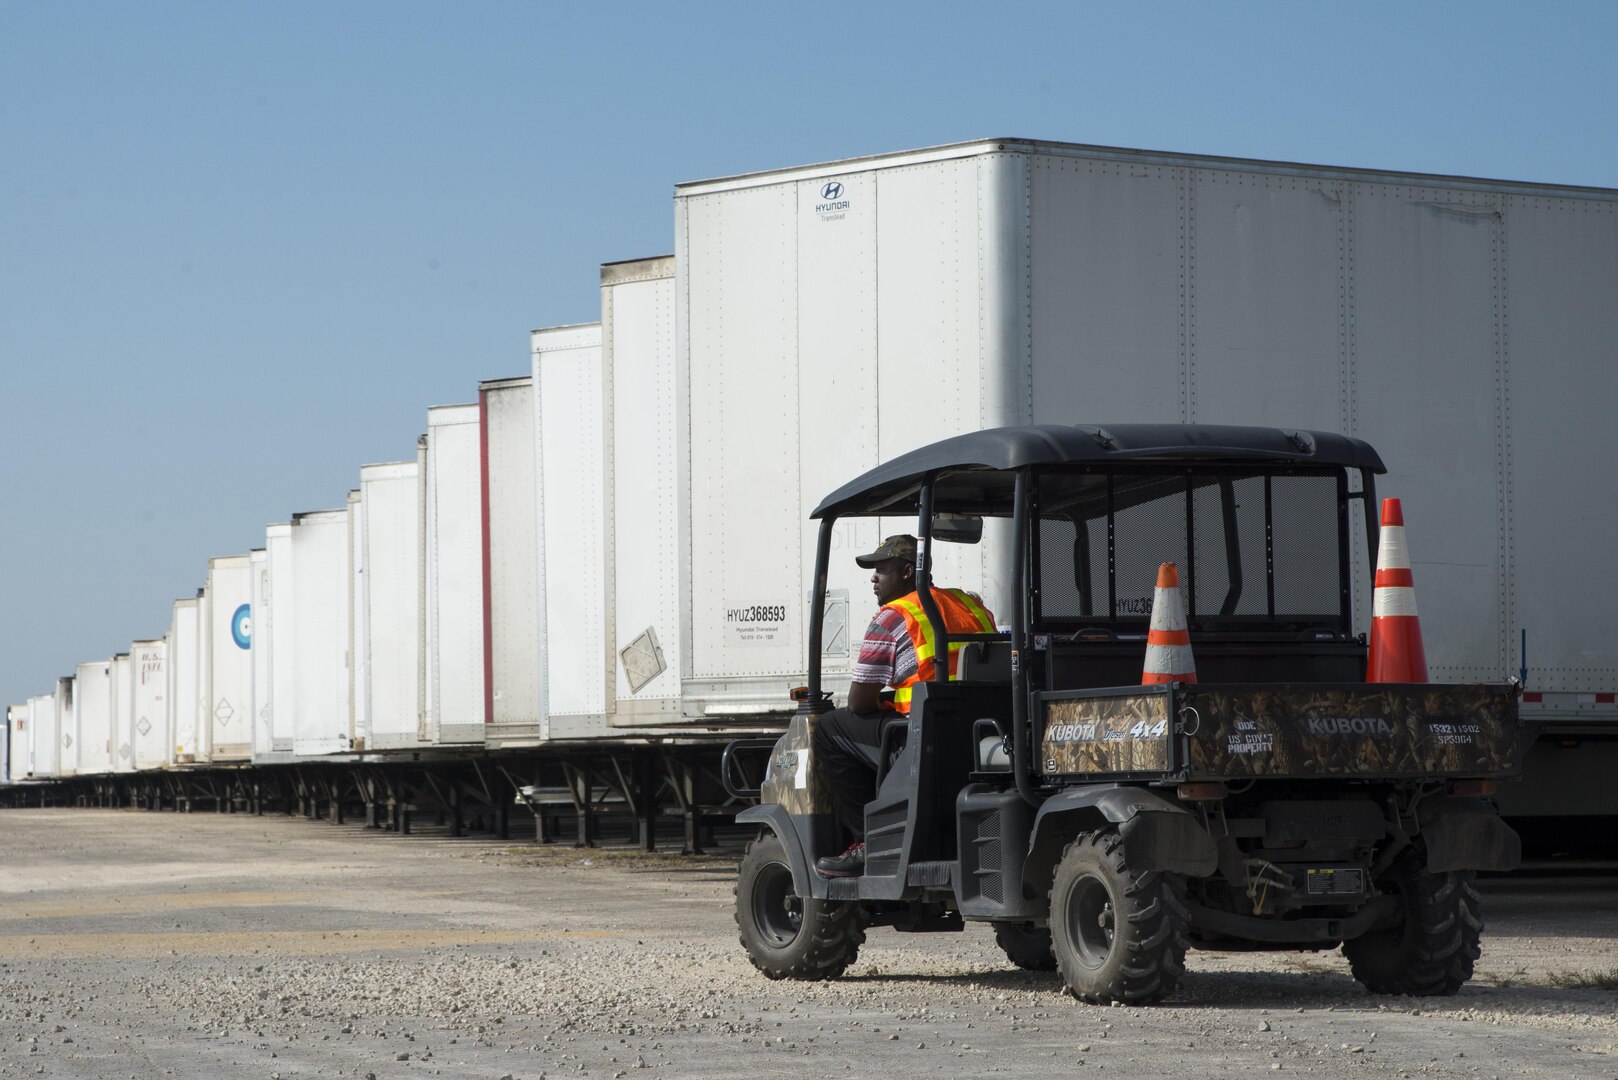 Worker in small vehicle facing left with semi trailers in a row behind him